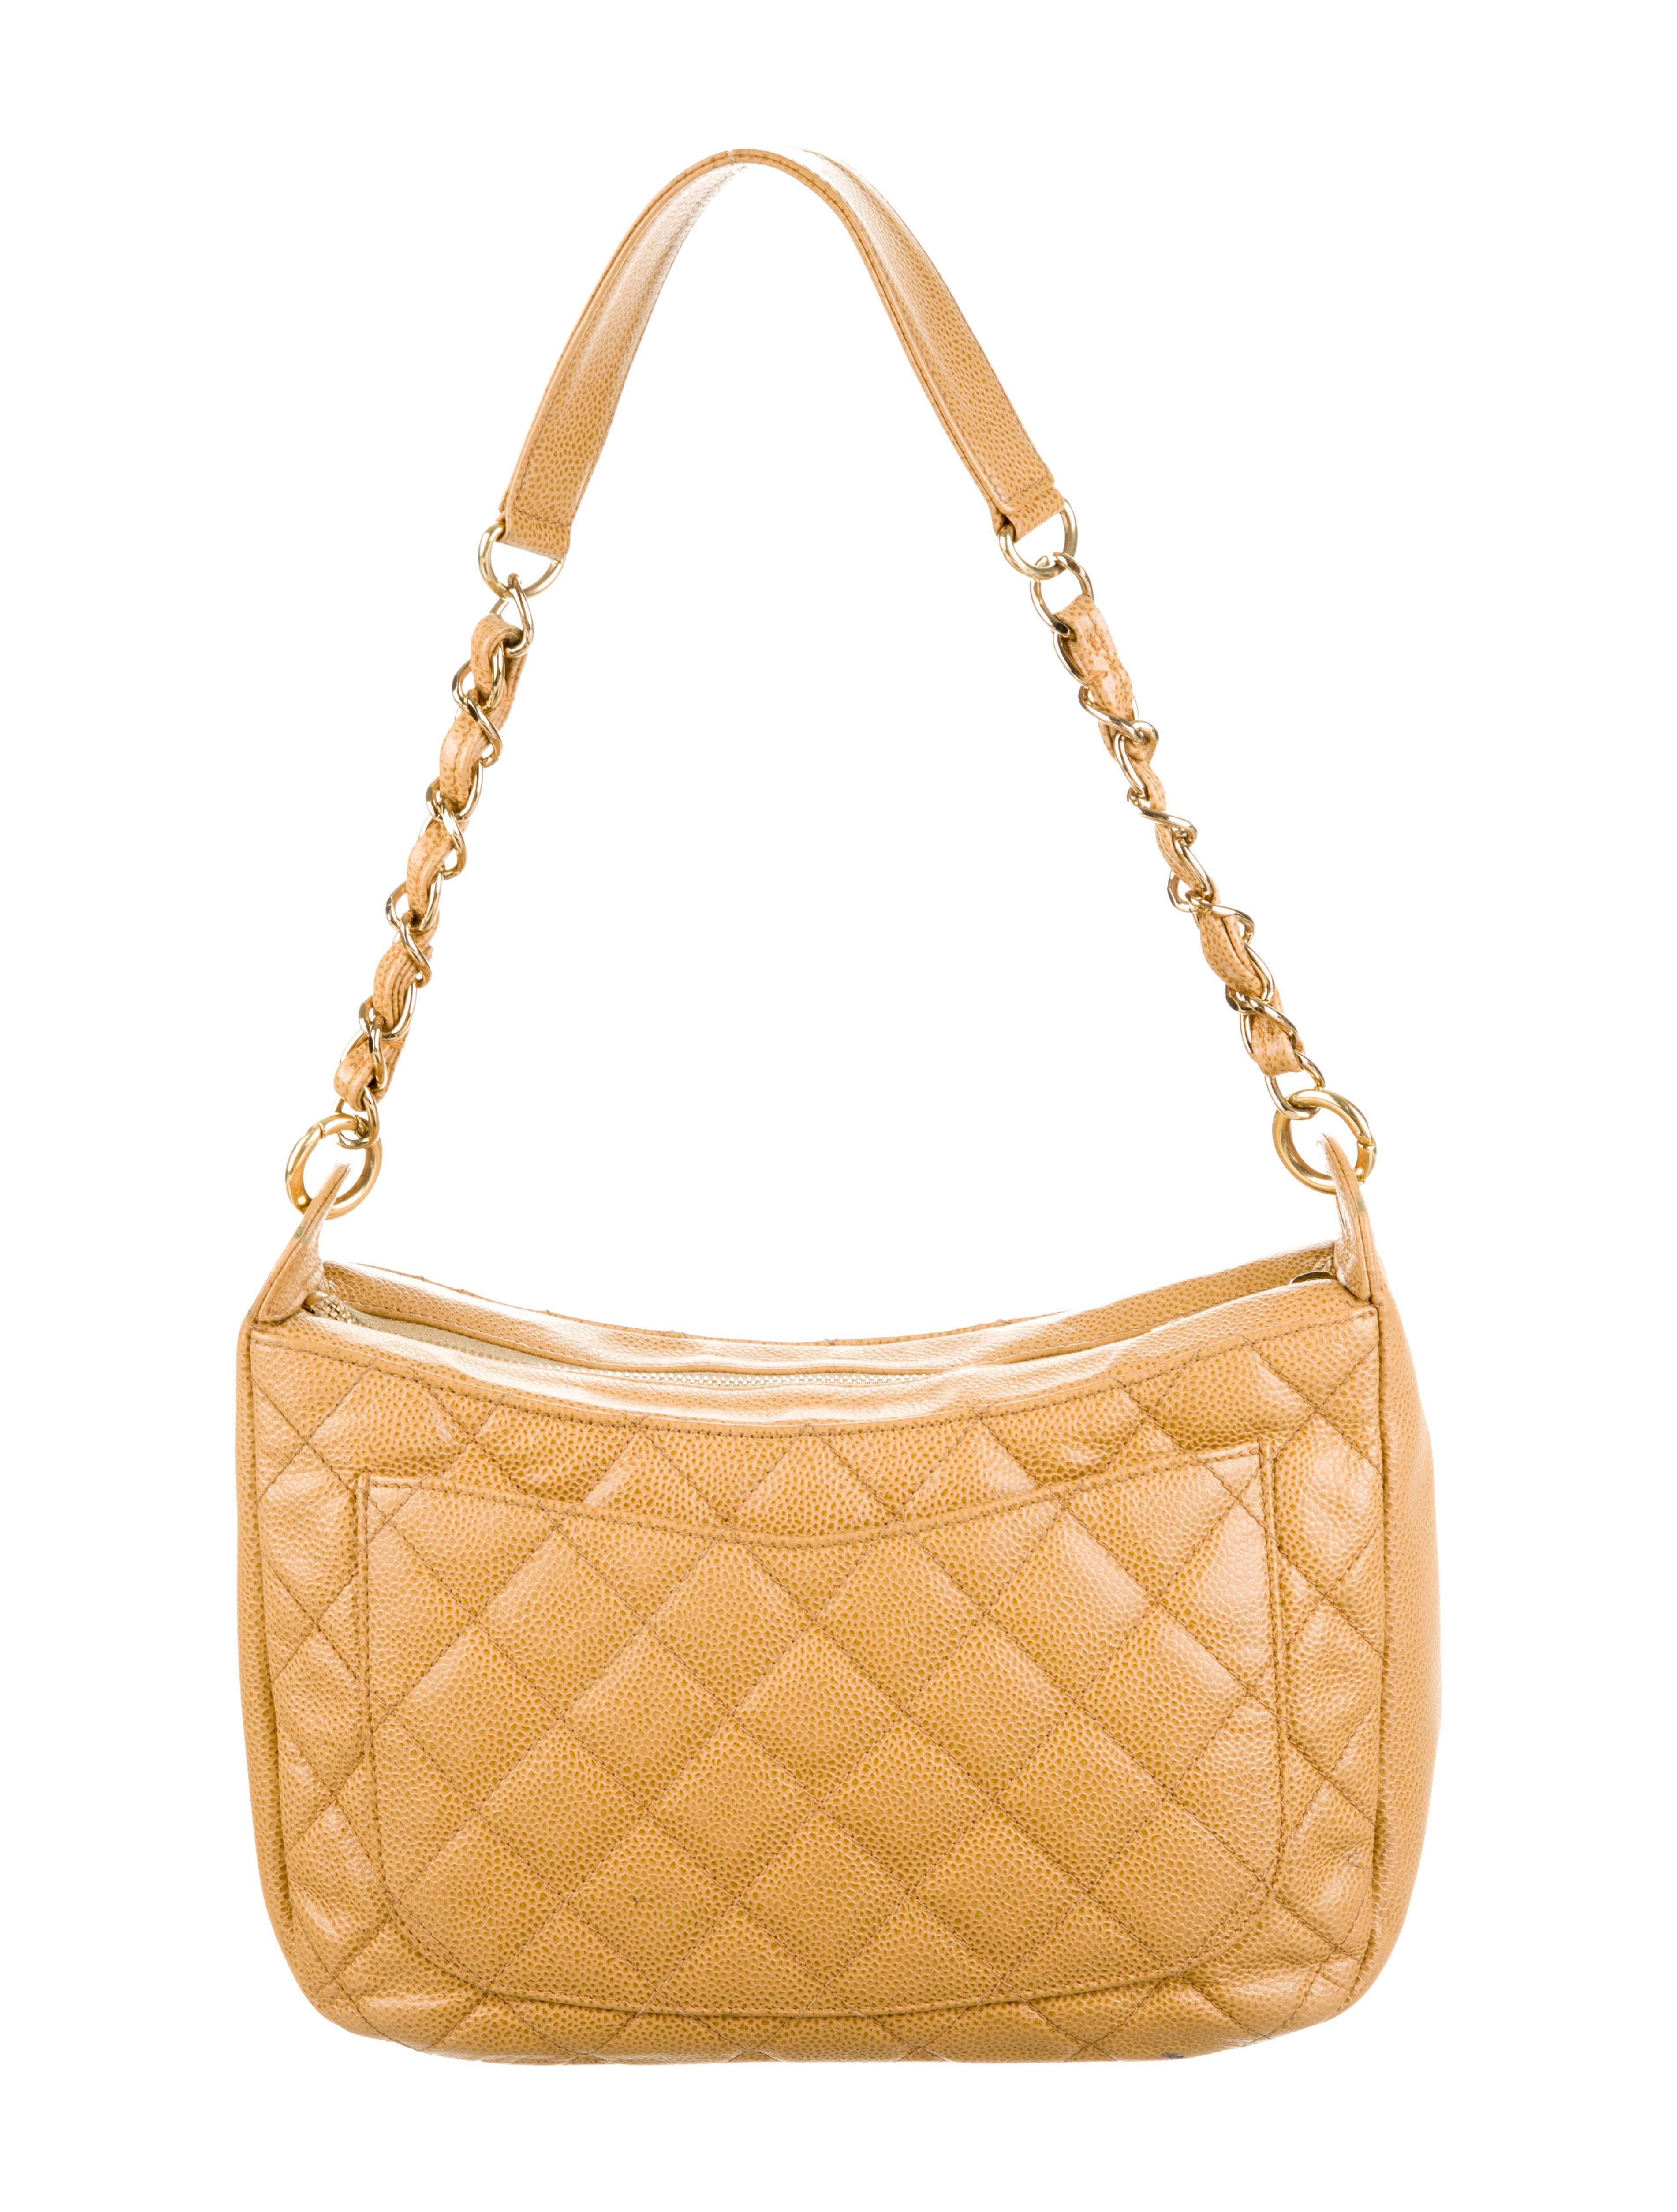 CURATOR'S NOTES

Chanel Nude Caviar Leather Gold Evening Top Handle Satchel Chain Shoulder Bag 

Caviar leather
Gold tone hardware 
Zipper closure
Made in France
Date code 8100679
Shoulder strap 10.5"
Measures 11" W x 6.5" H x 4"